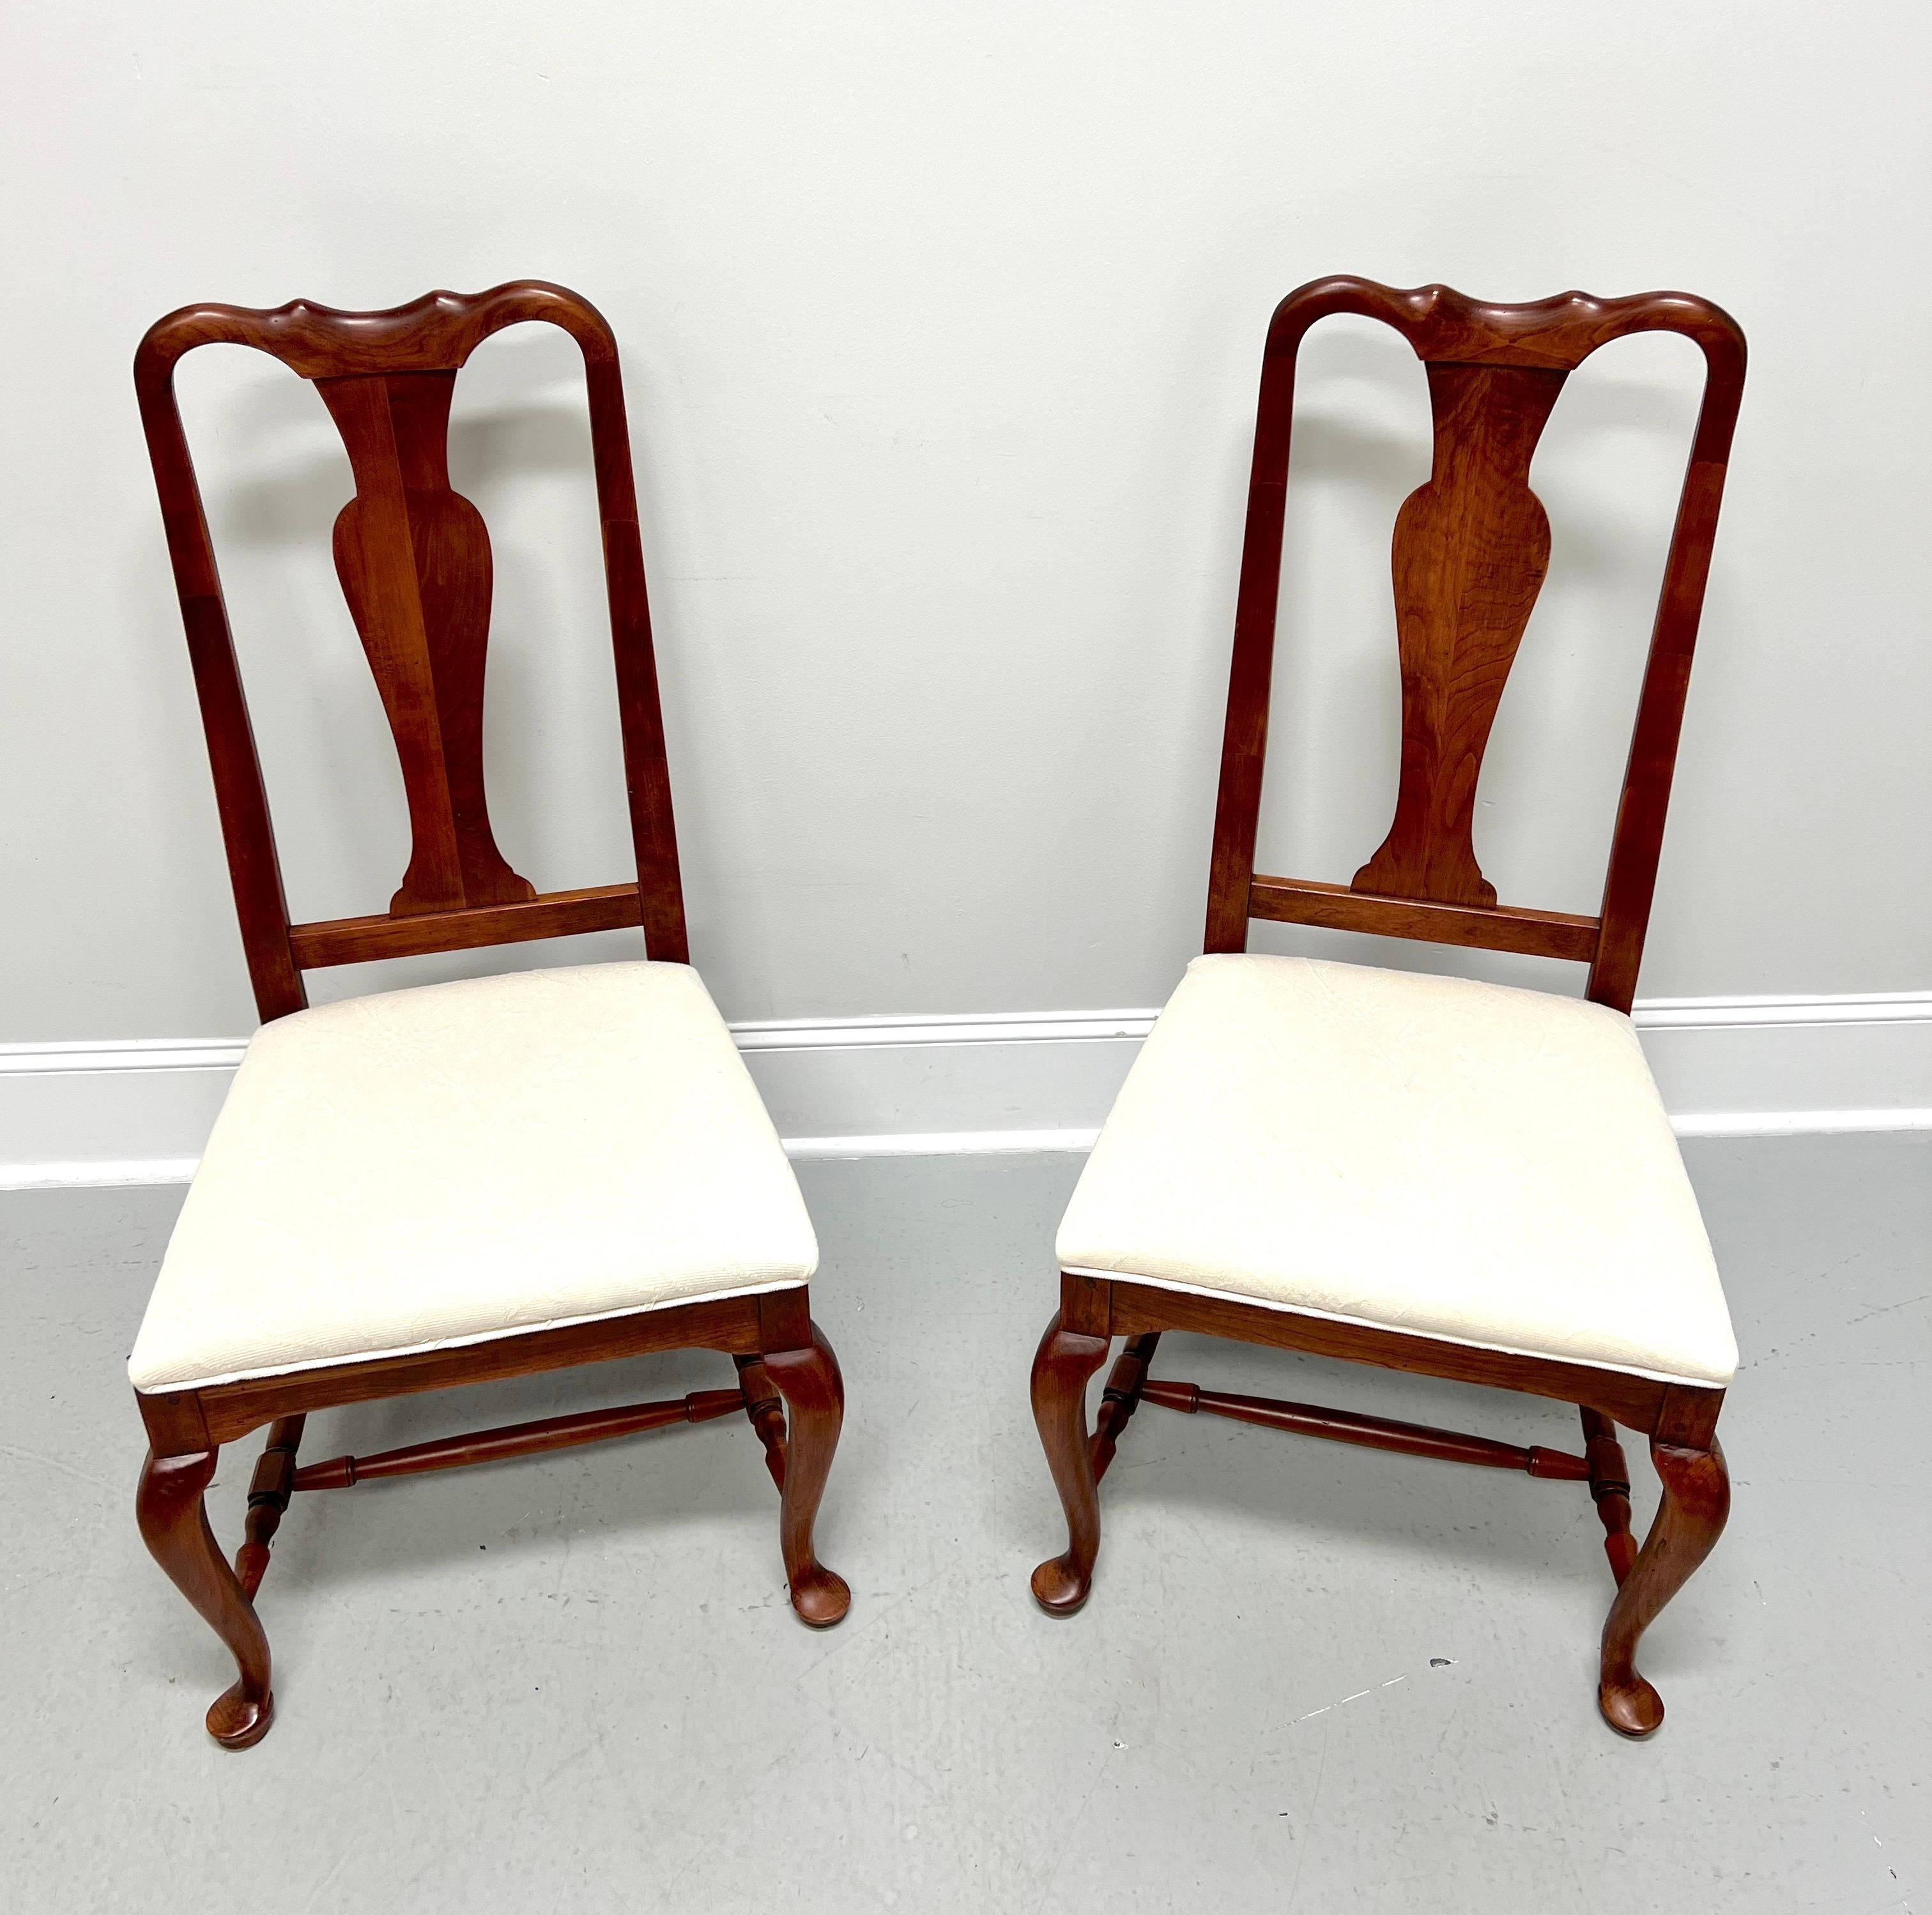 A pair of Queen Anne style dining side chairs by Lexington Furniture, from their Bob Timberlake Collection. Solid cherry wood, carved crest rail & center backrest, upholstered seat in a neutral off-white fabric, carved apron at legs, turned